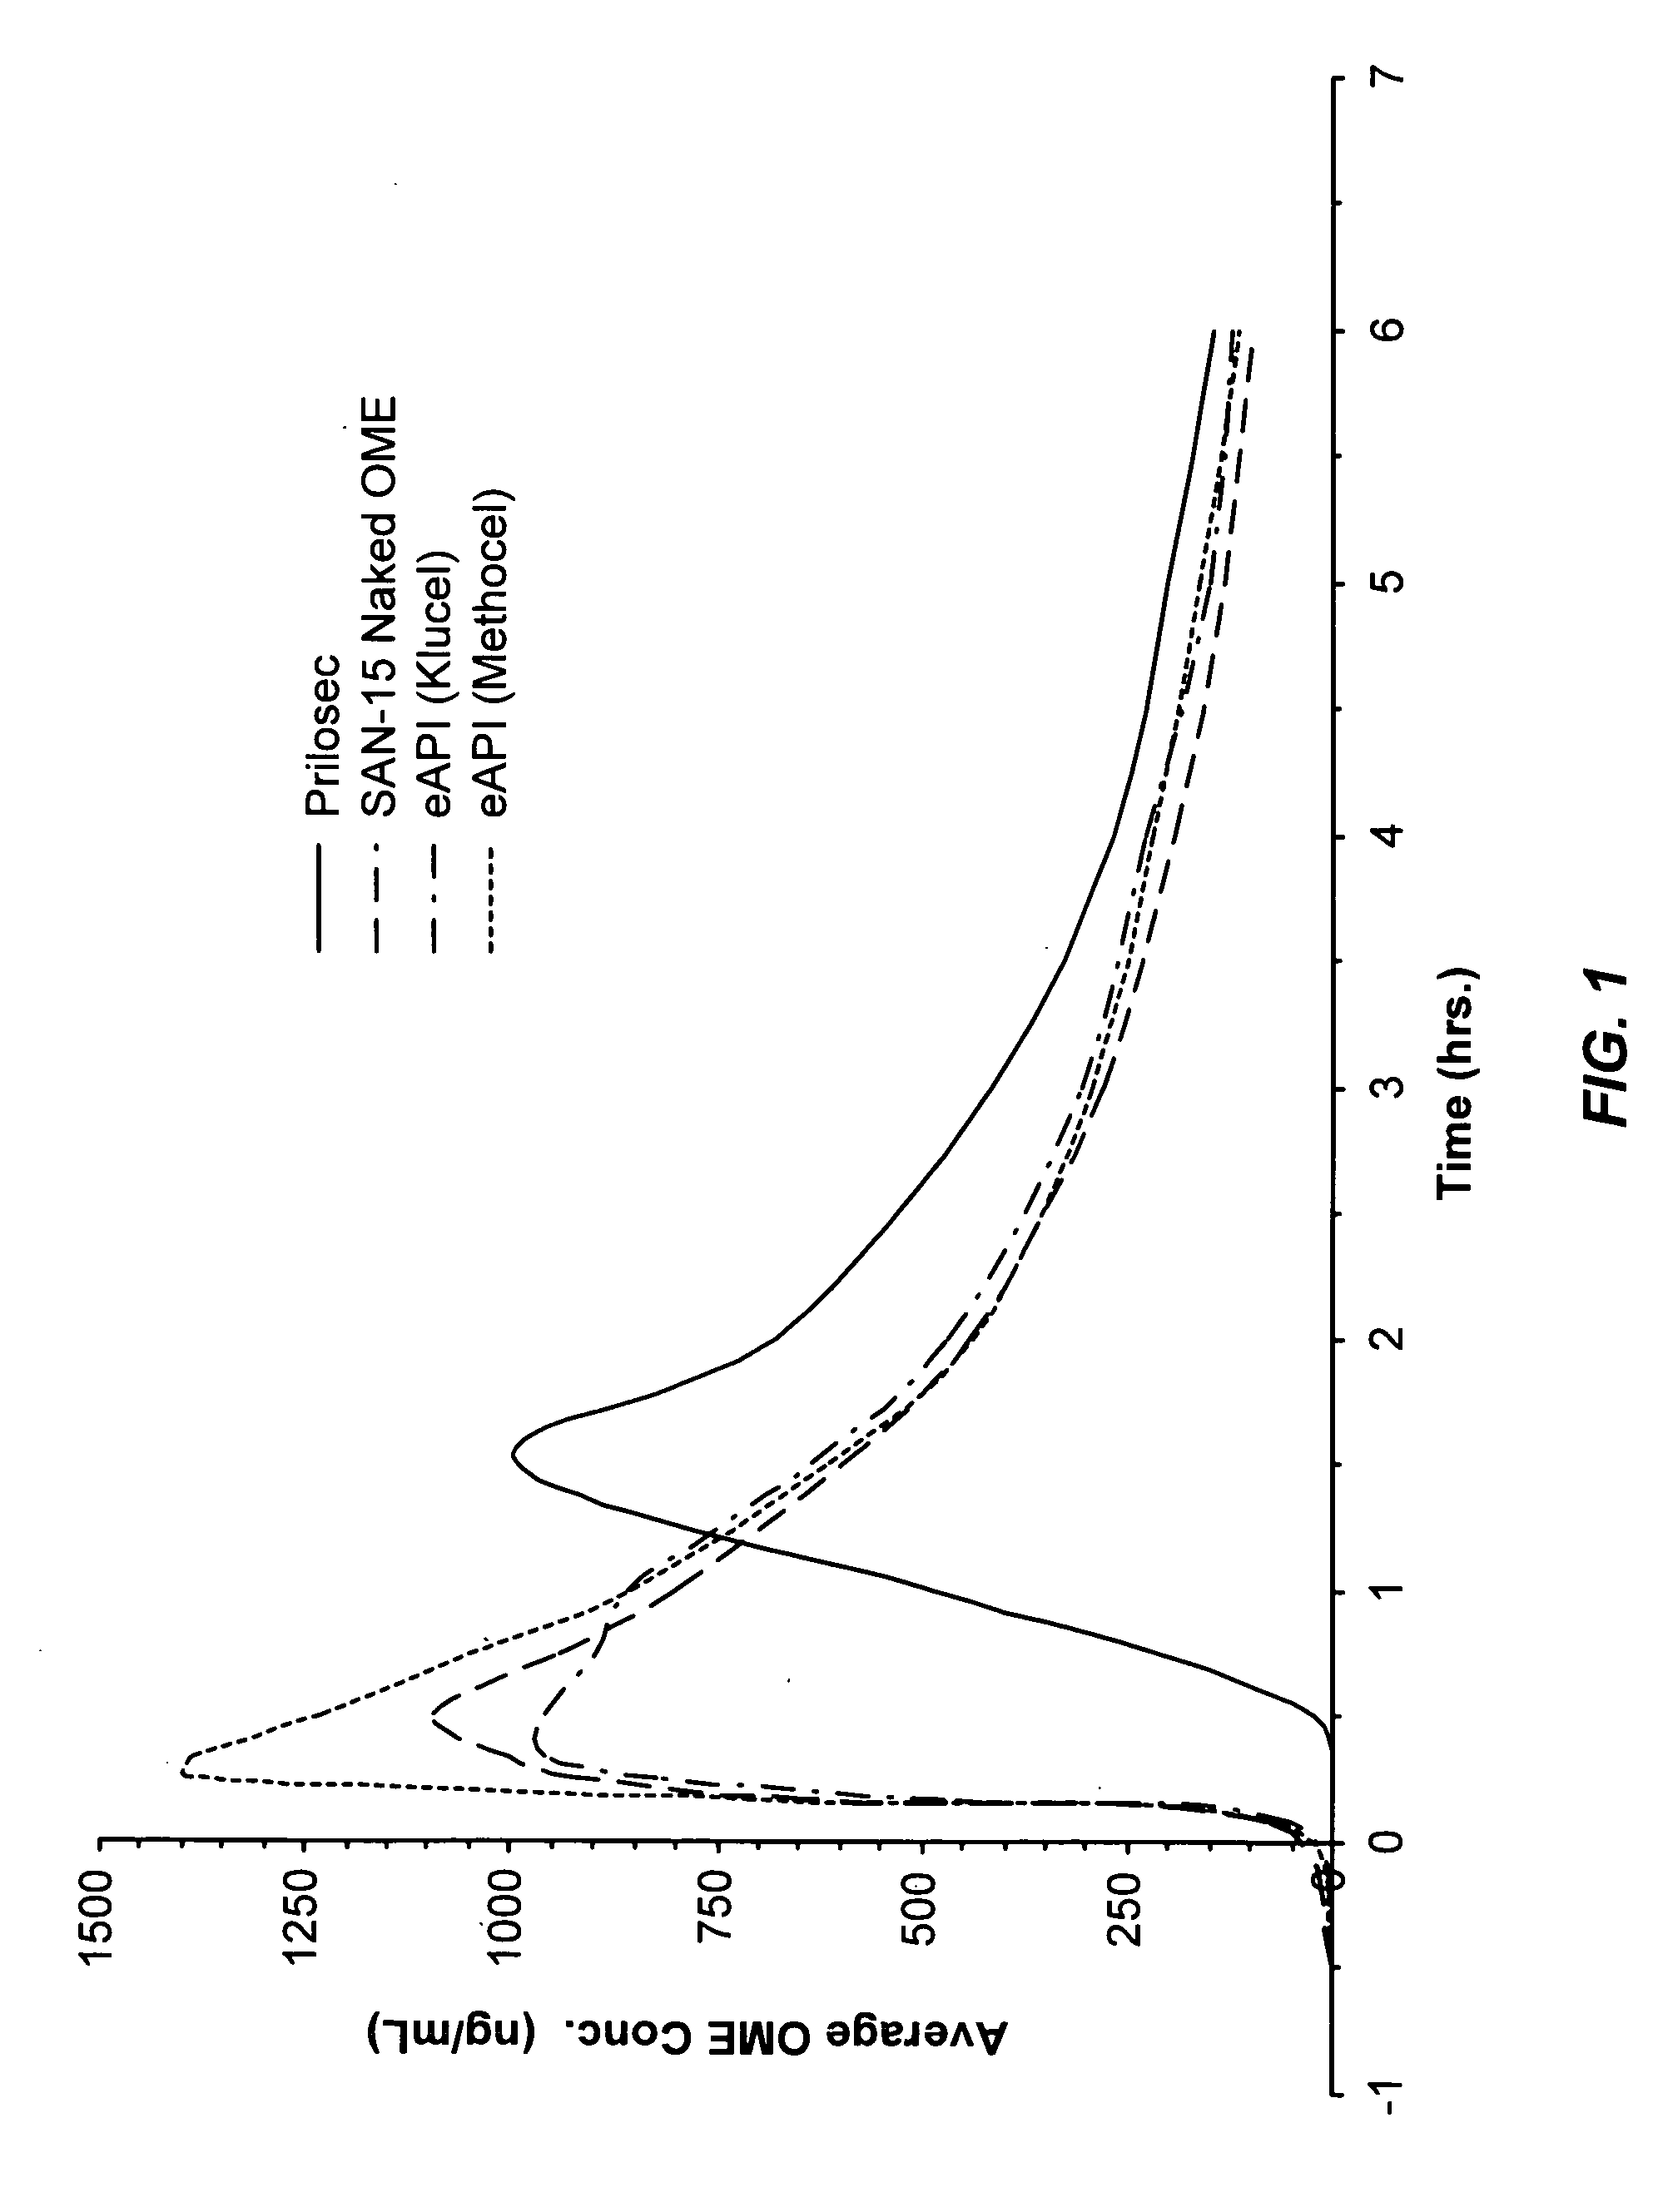 Pharmaceutical formulatins useful for inhibiting acid secretion and methods for making and using them